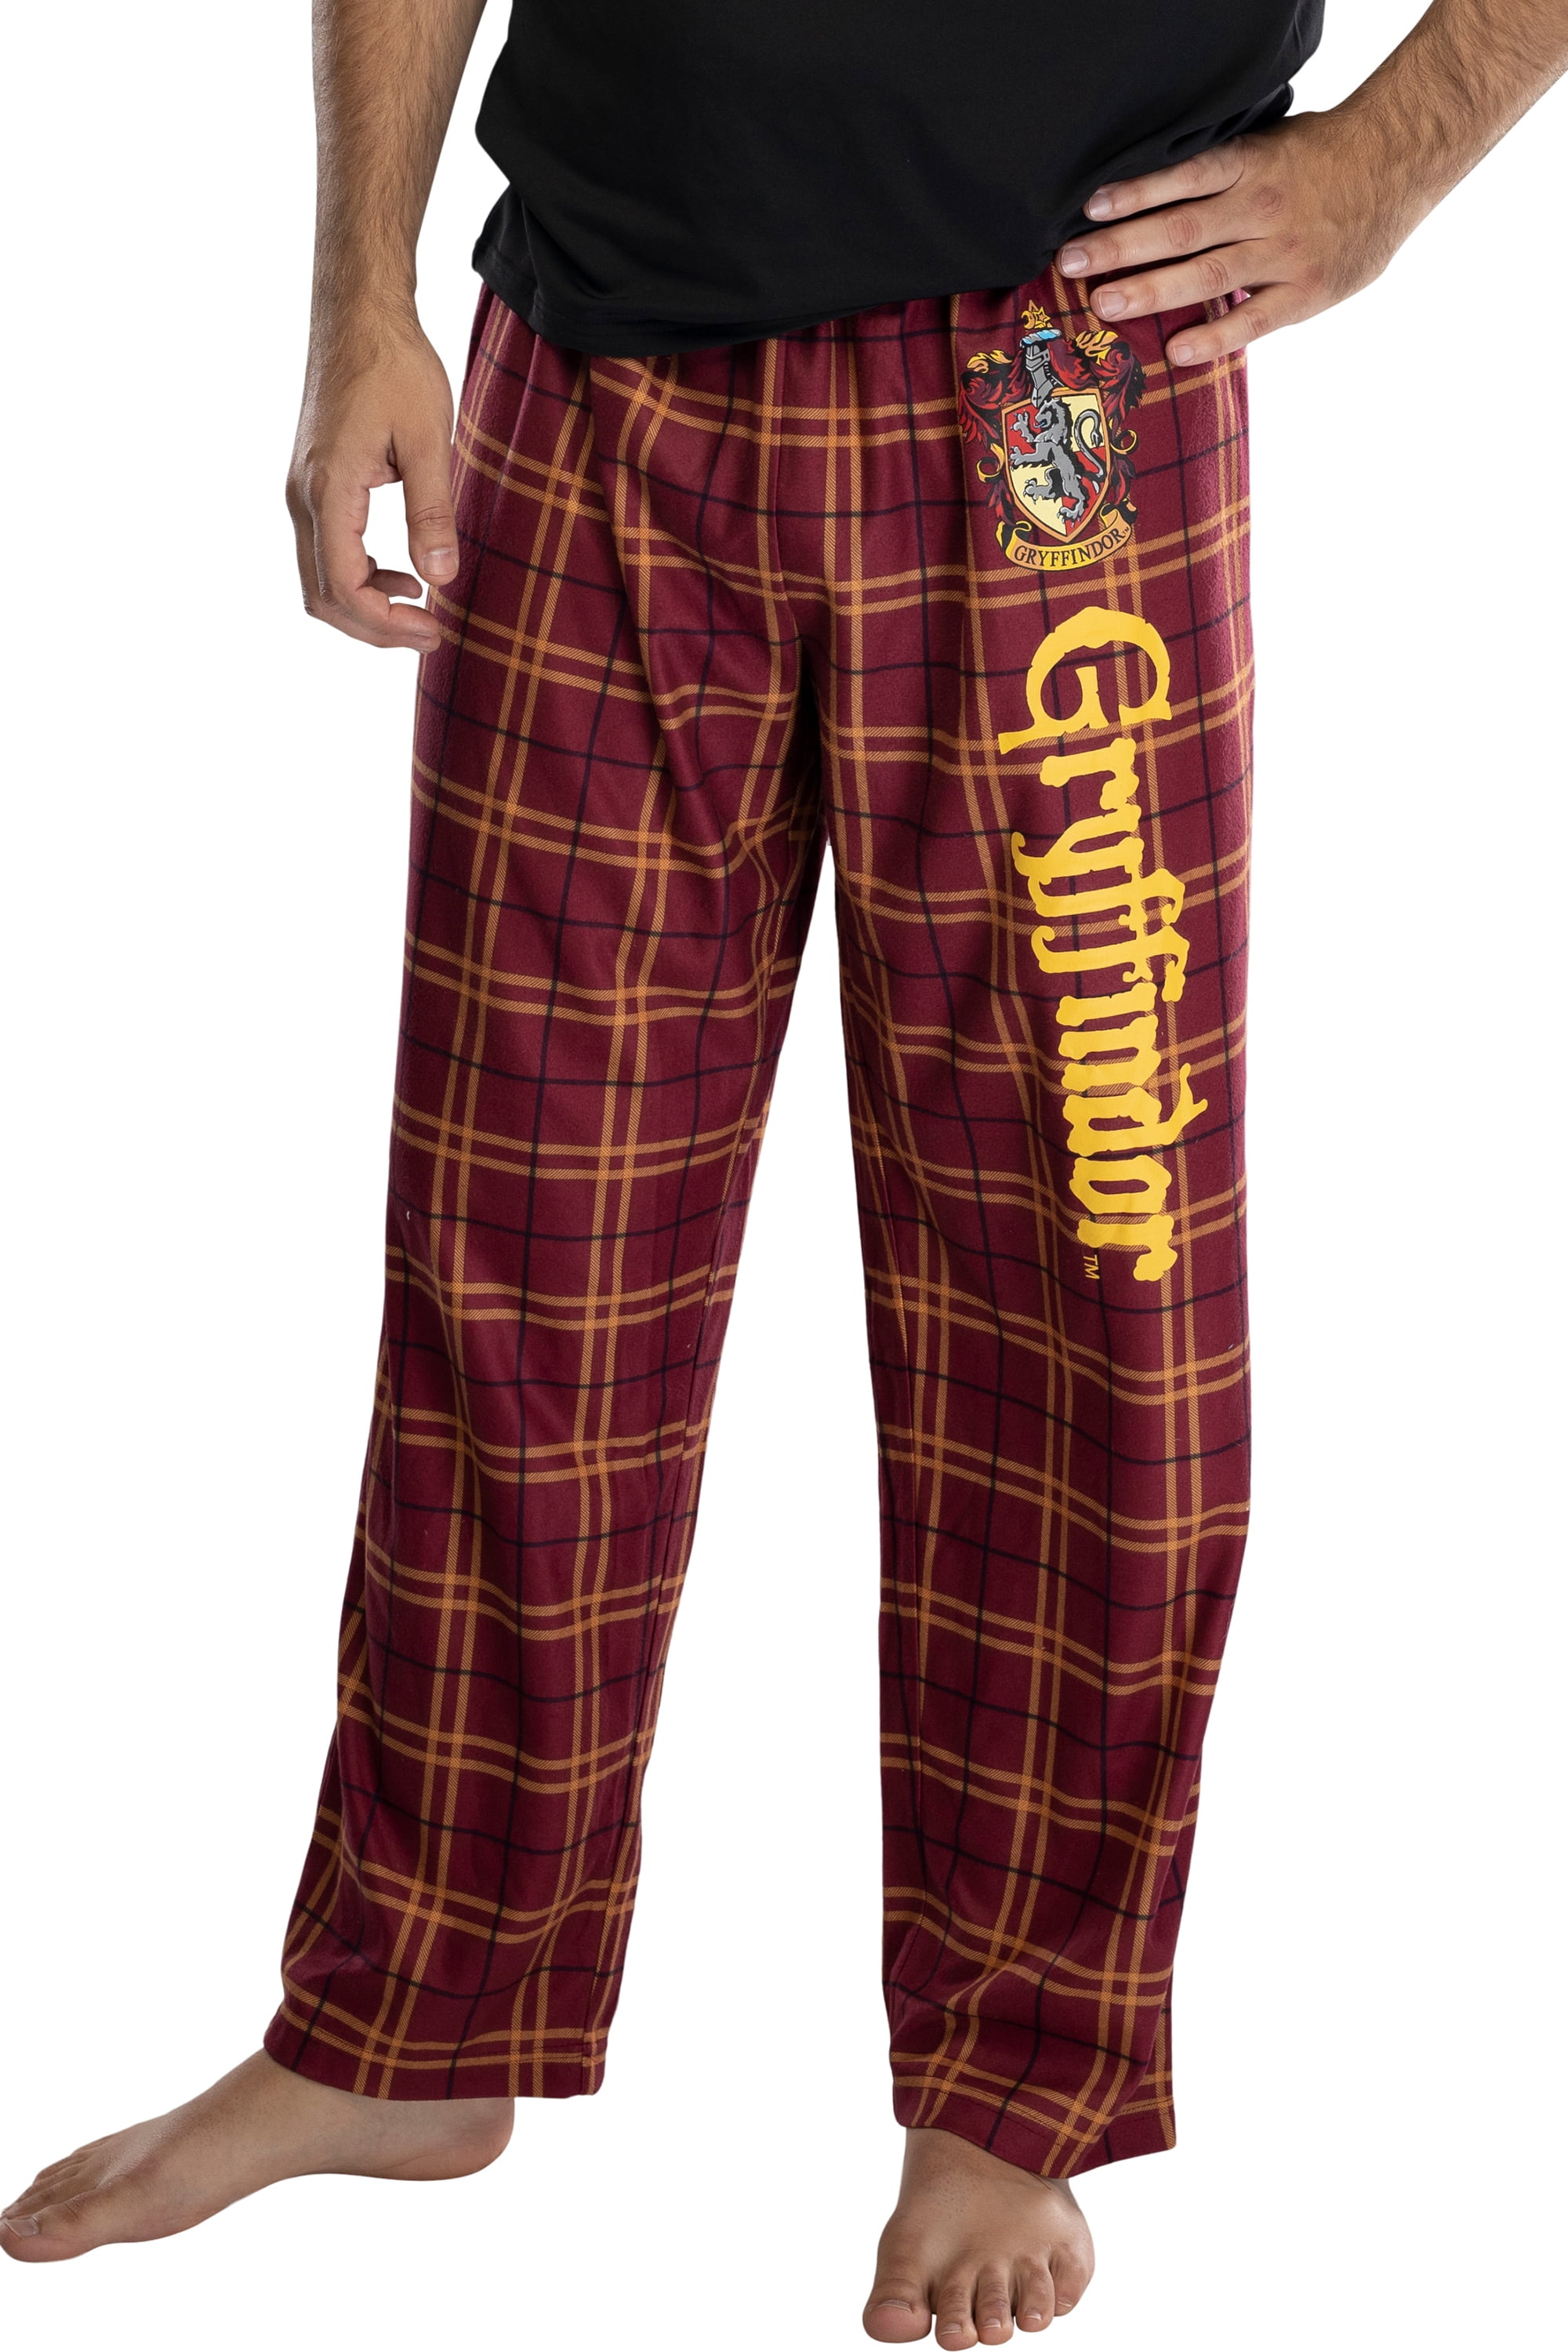 Harry Potter Women's Knickers Pants George Gryffindor Briefs Christmas Gift